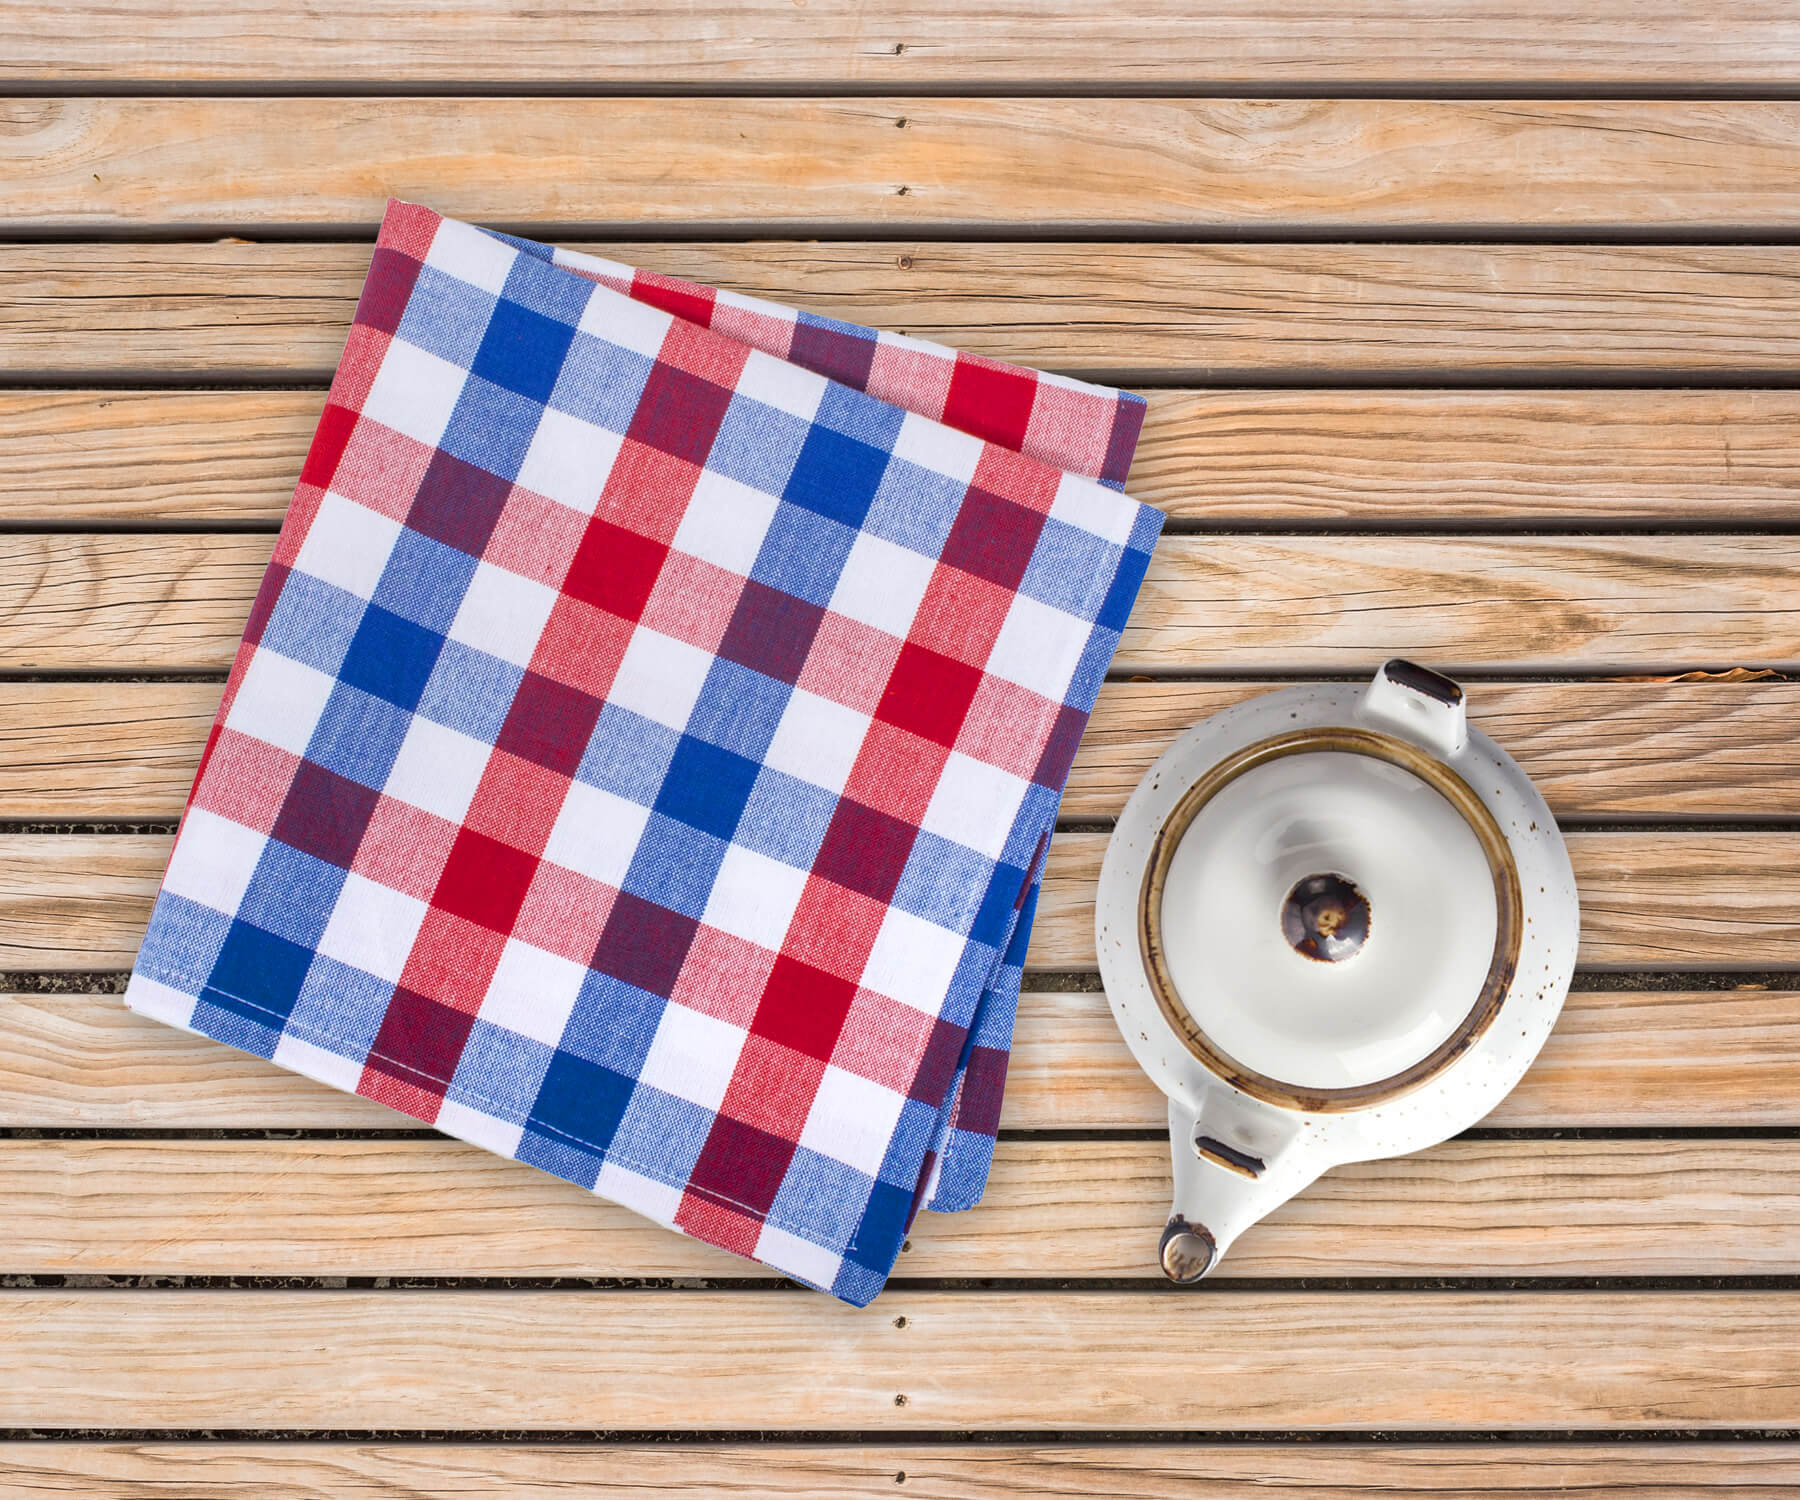 dish towels for kitchen, blue buffalo plaid dish towels for cleaning